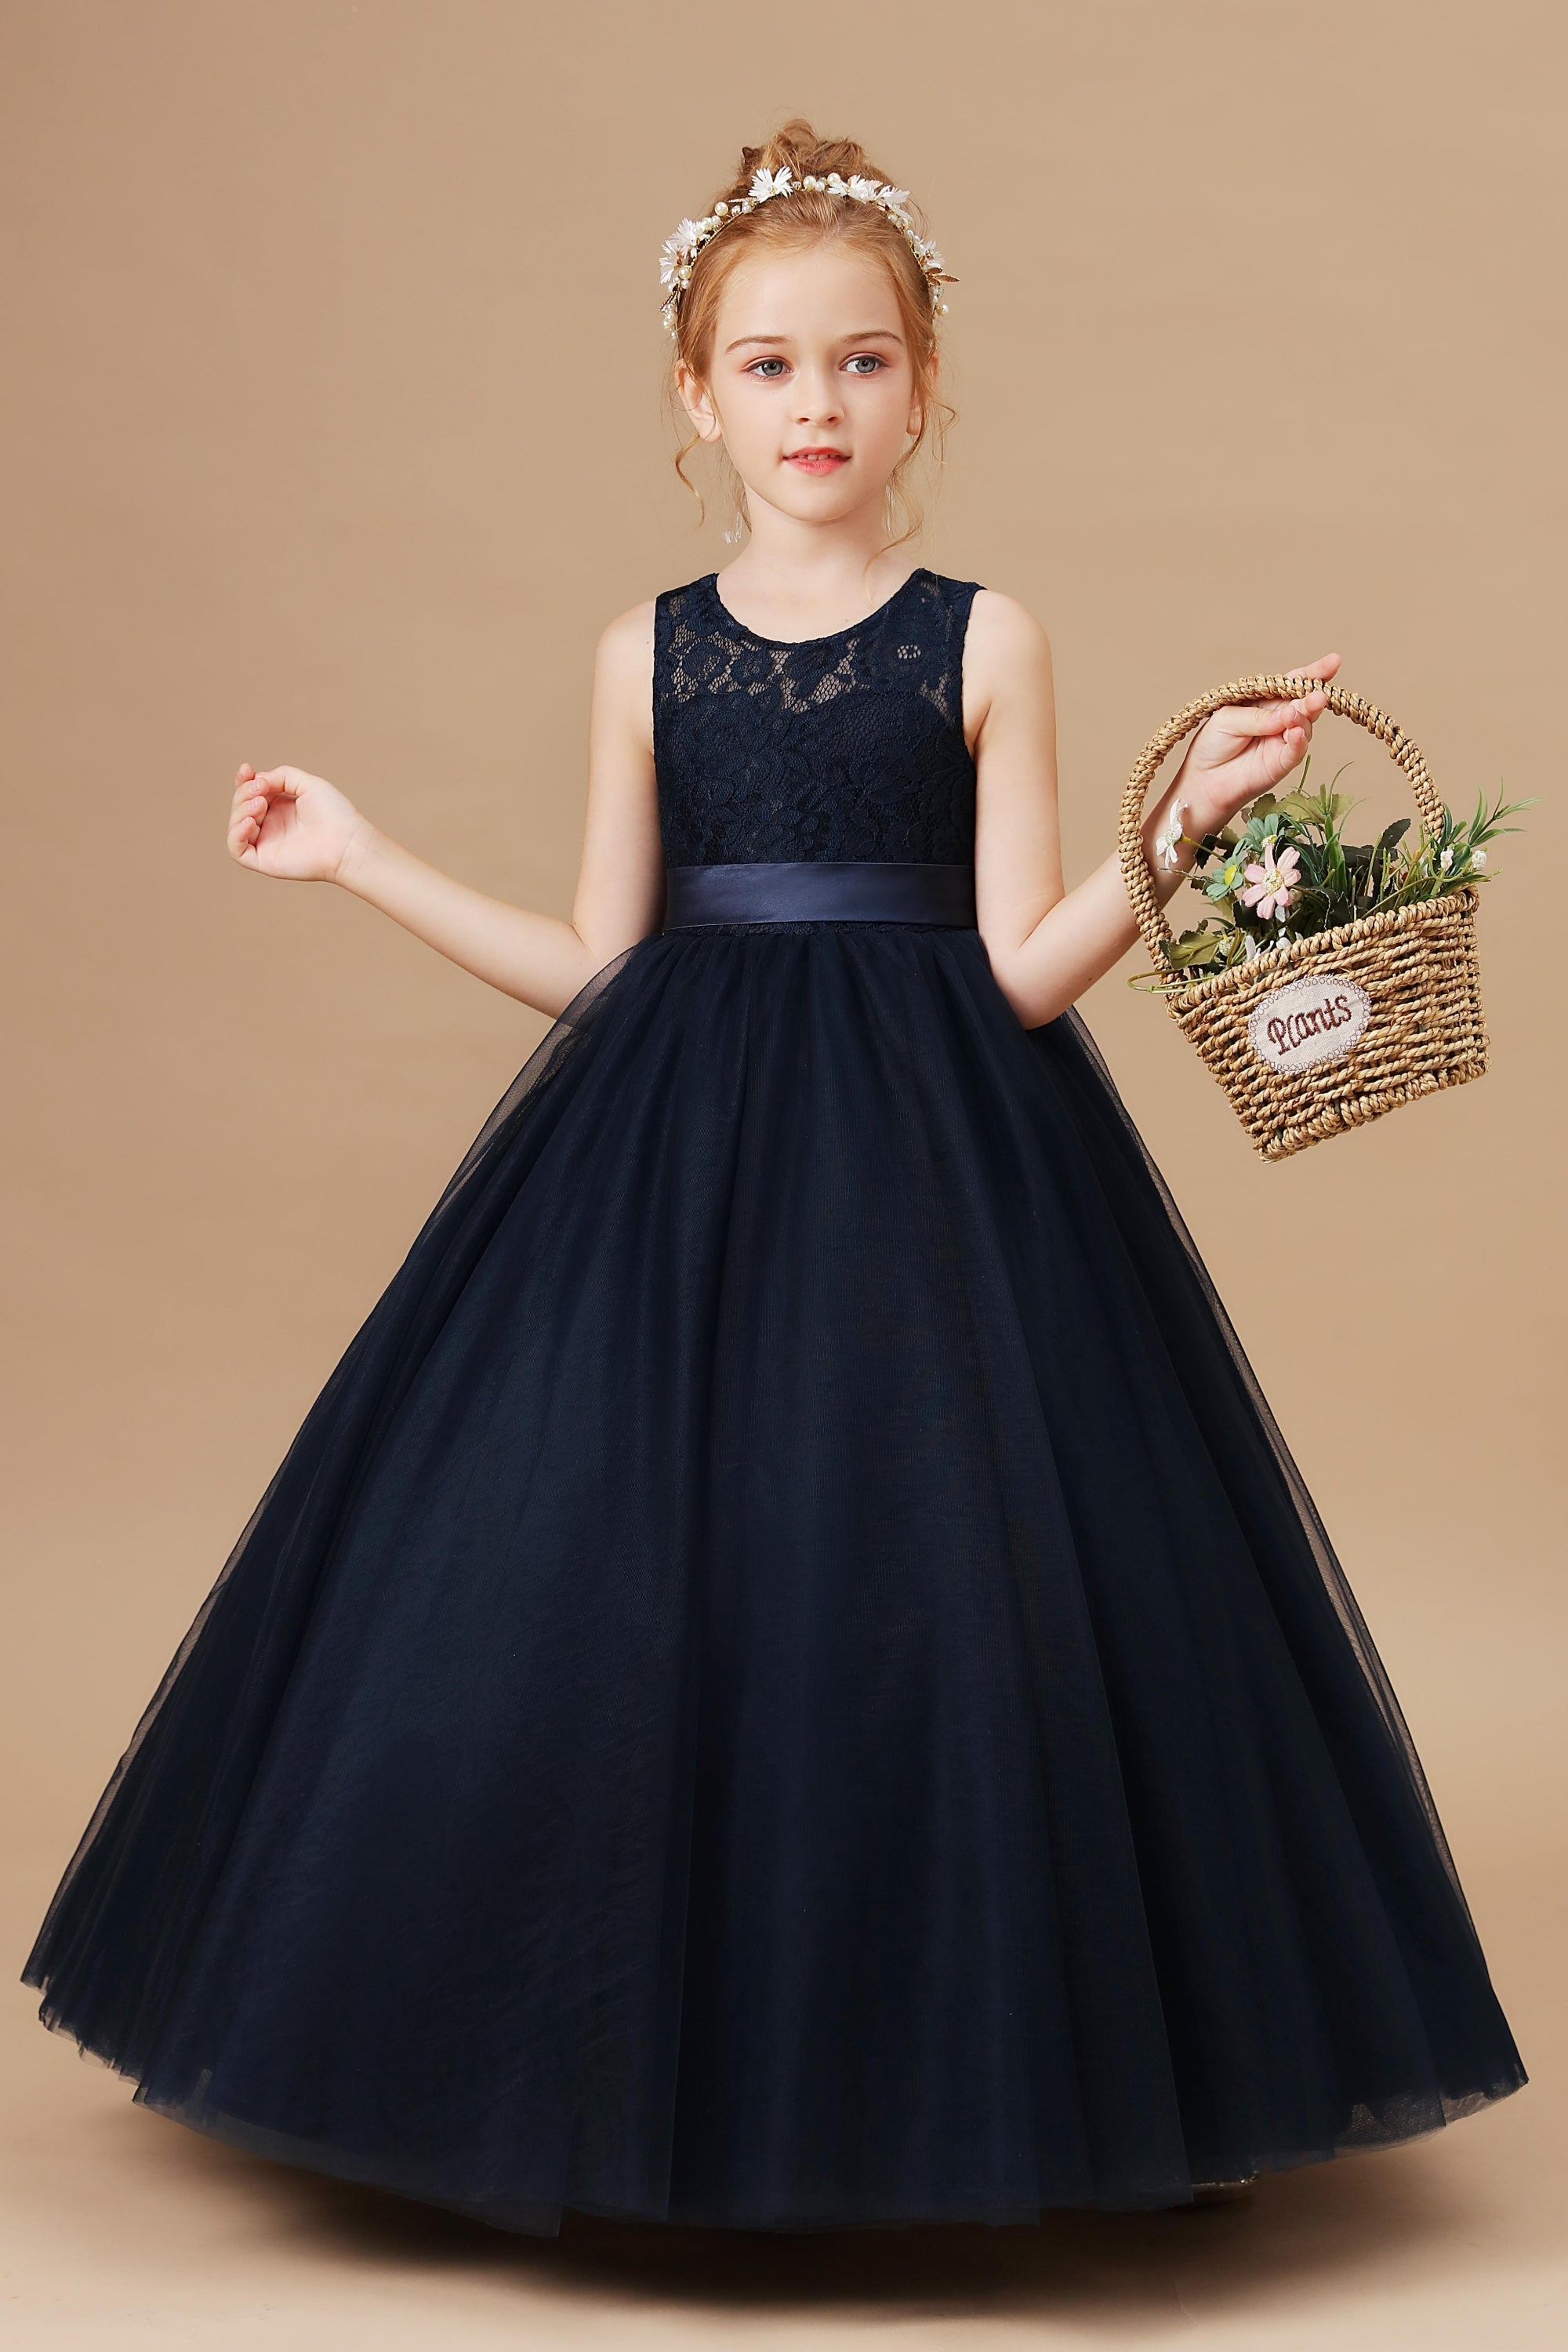 Lace Tulle Black Stain-Sash Pretty Flower Girl Dresses With Bownot